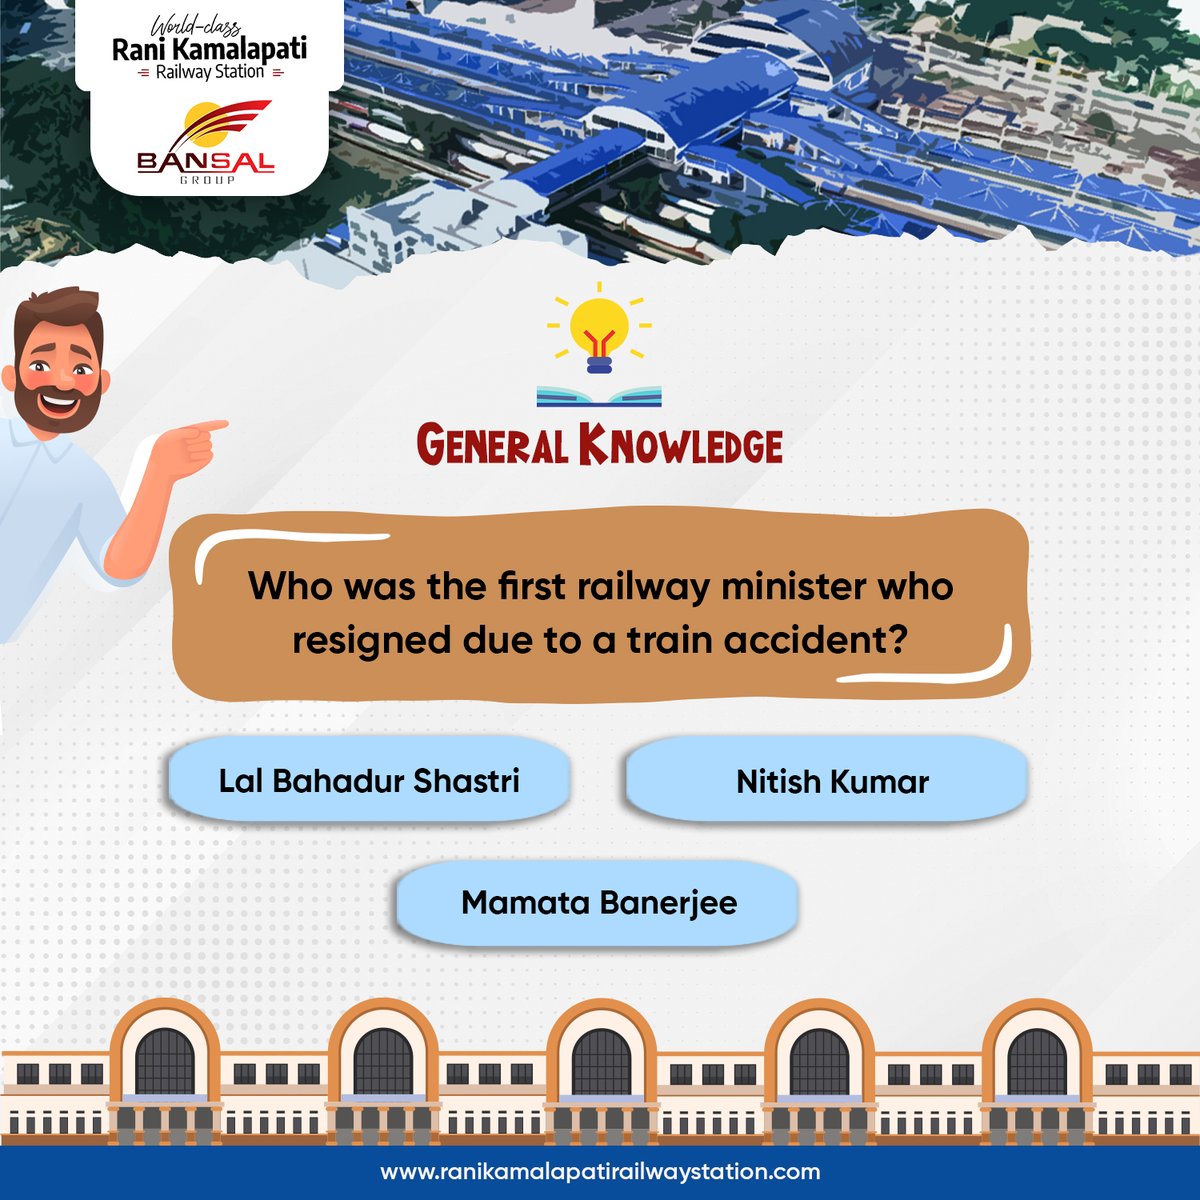 Let's see how many of you can answer this one! Comment your answers below...
.
#generalknowledgequiz #quiz #railwayquestions #brainexercise #railwayminister #train #RaniKamalapatiRailwayStation #WorldClassRailwayStation #Bhopal #BansalGroup